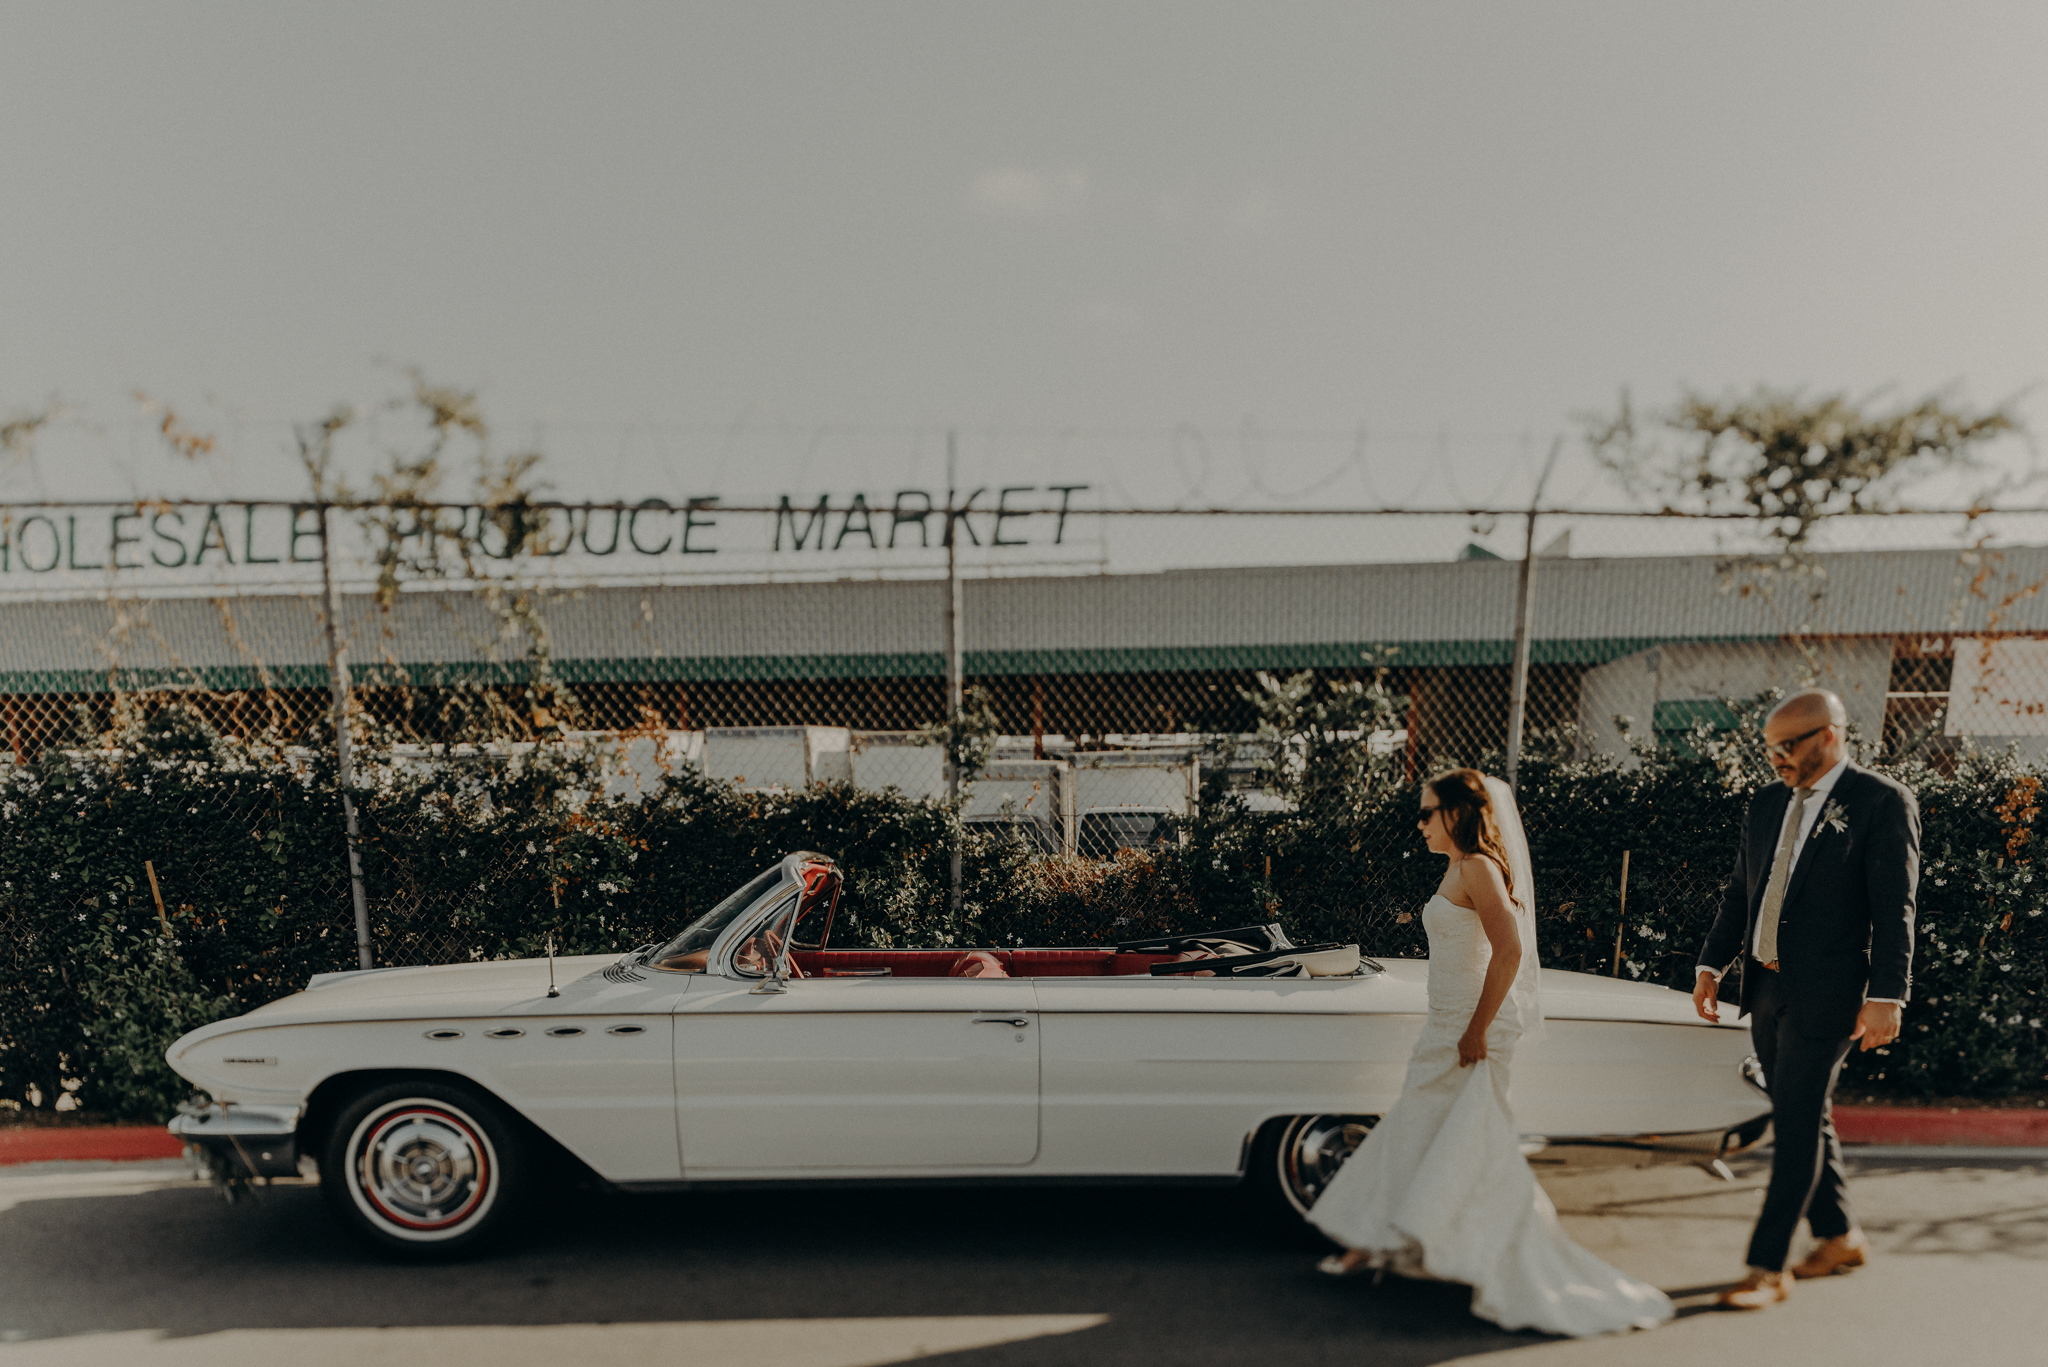 The Unique Space Wedding Photographer - Los Angeles Wedding Photography - IsaiahAndTaylor.com-113.jpg